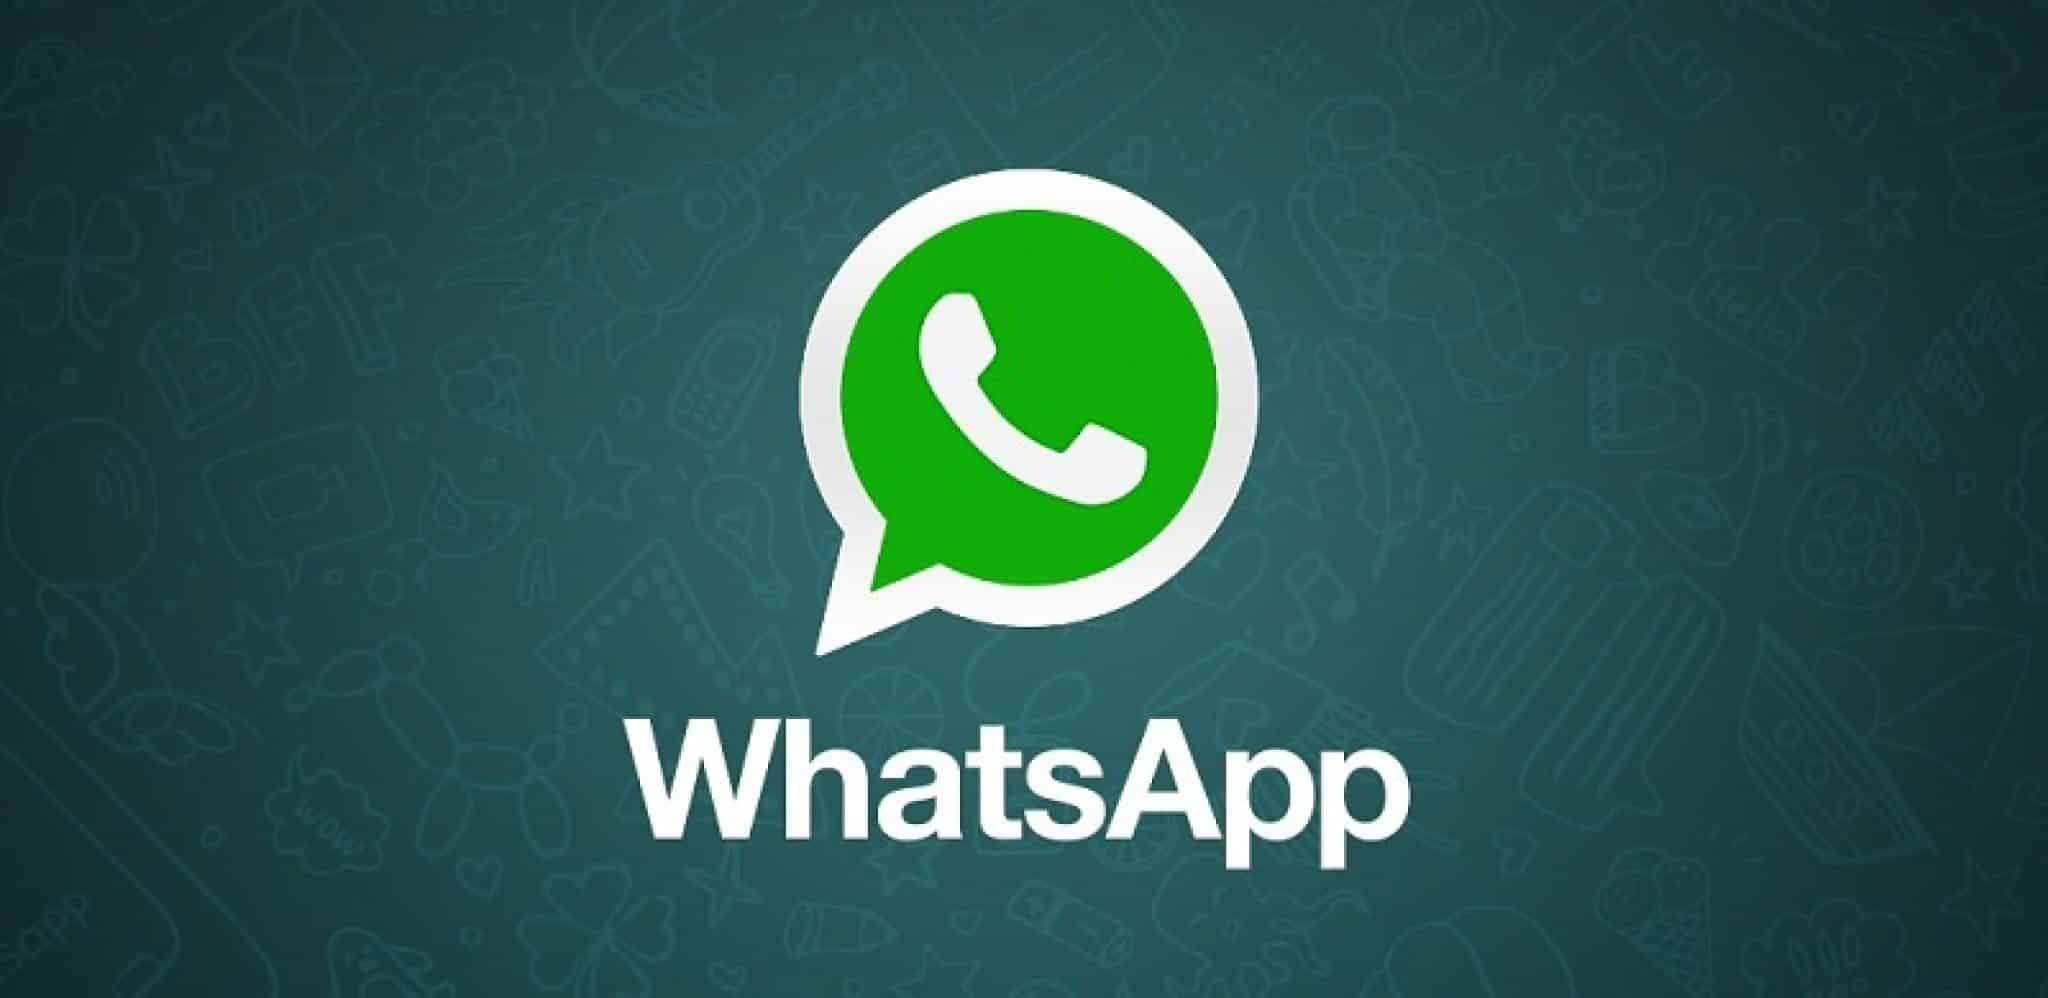 can you download whatsapp on a laptop